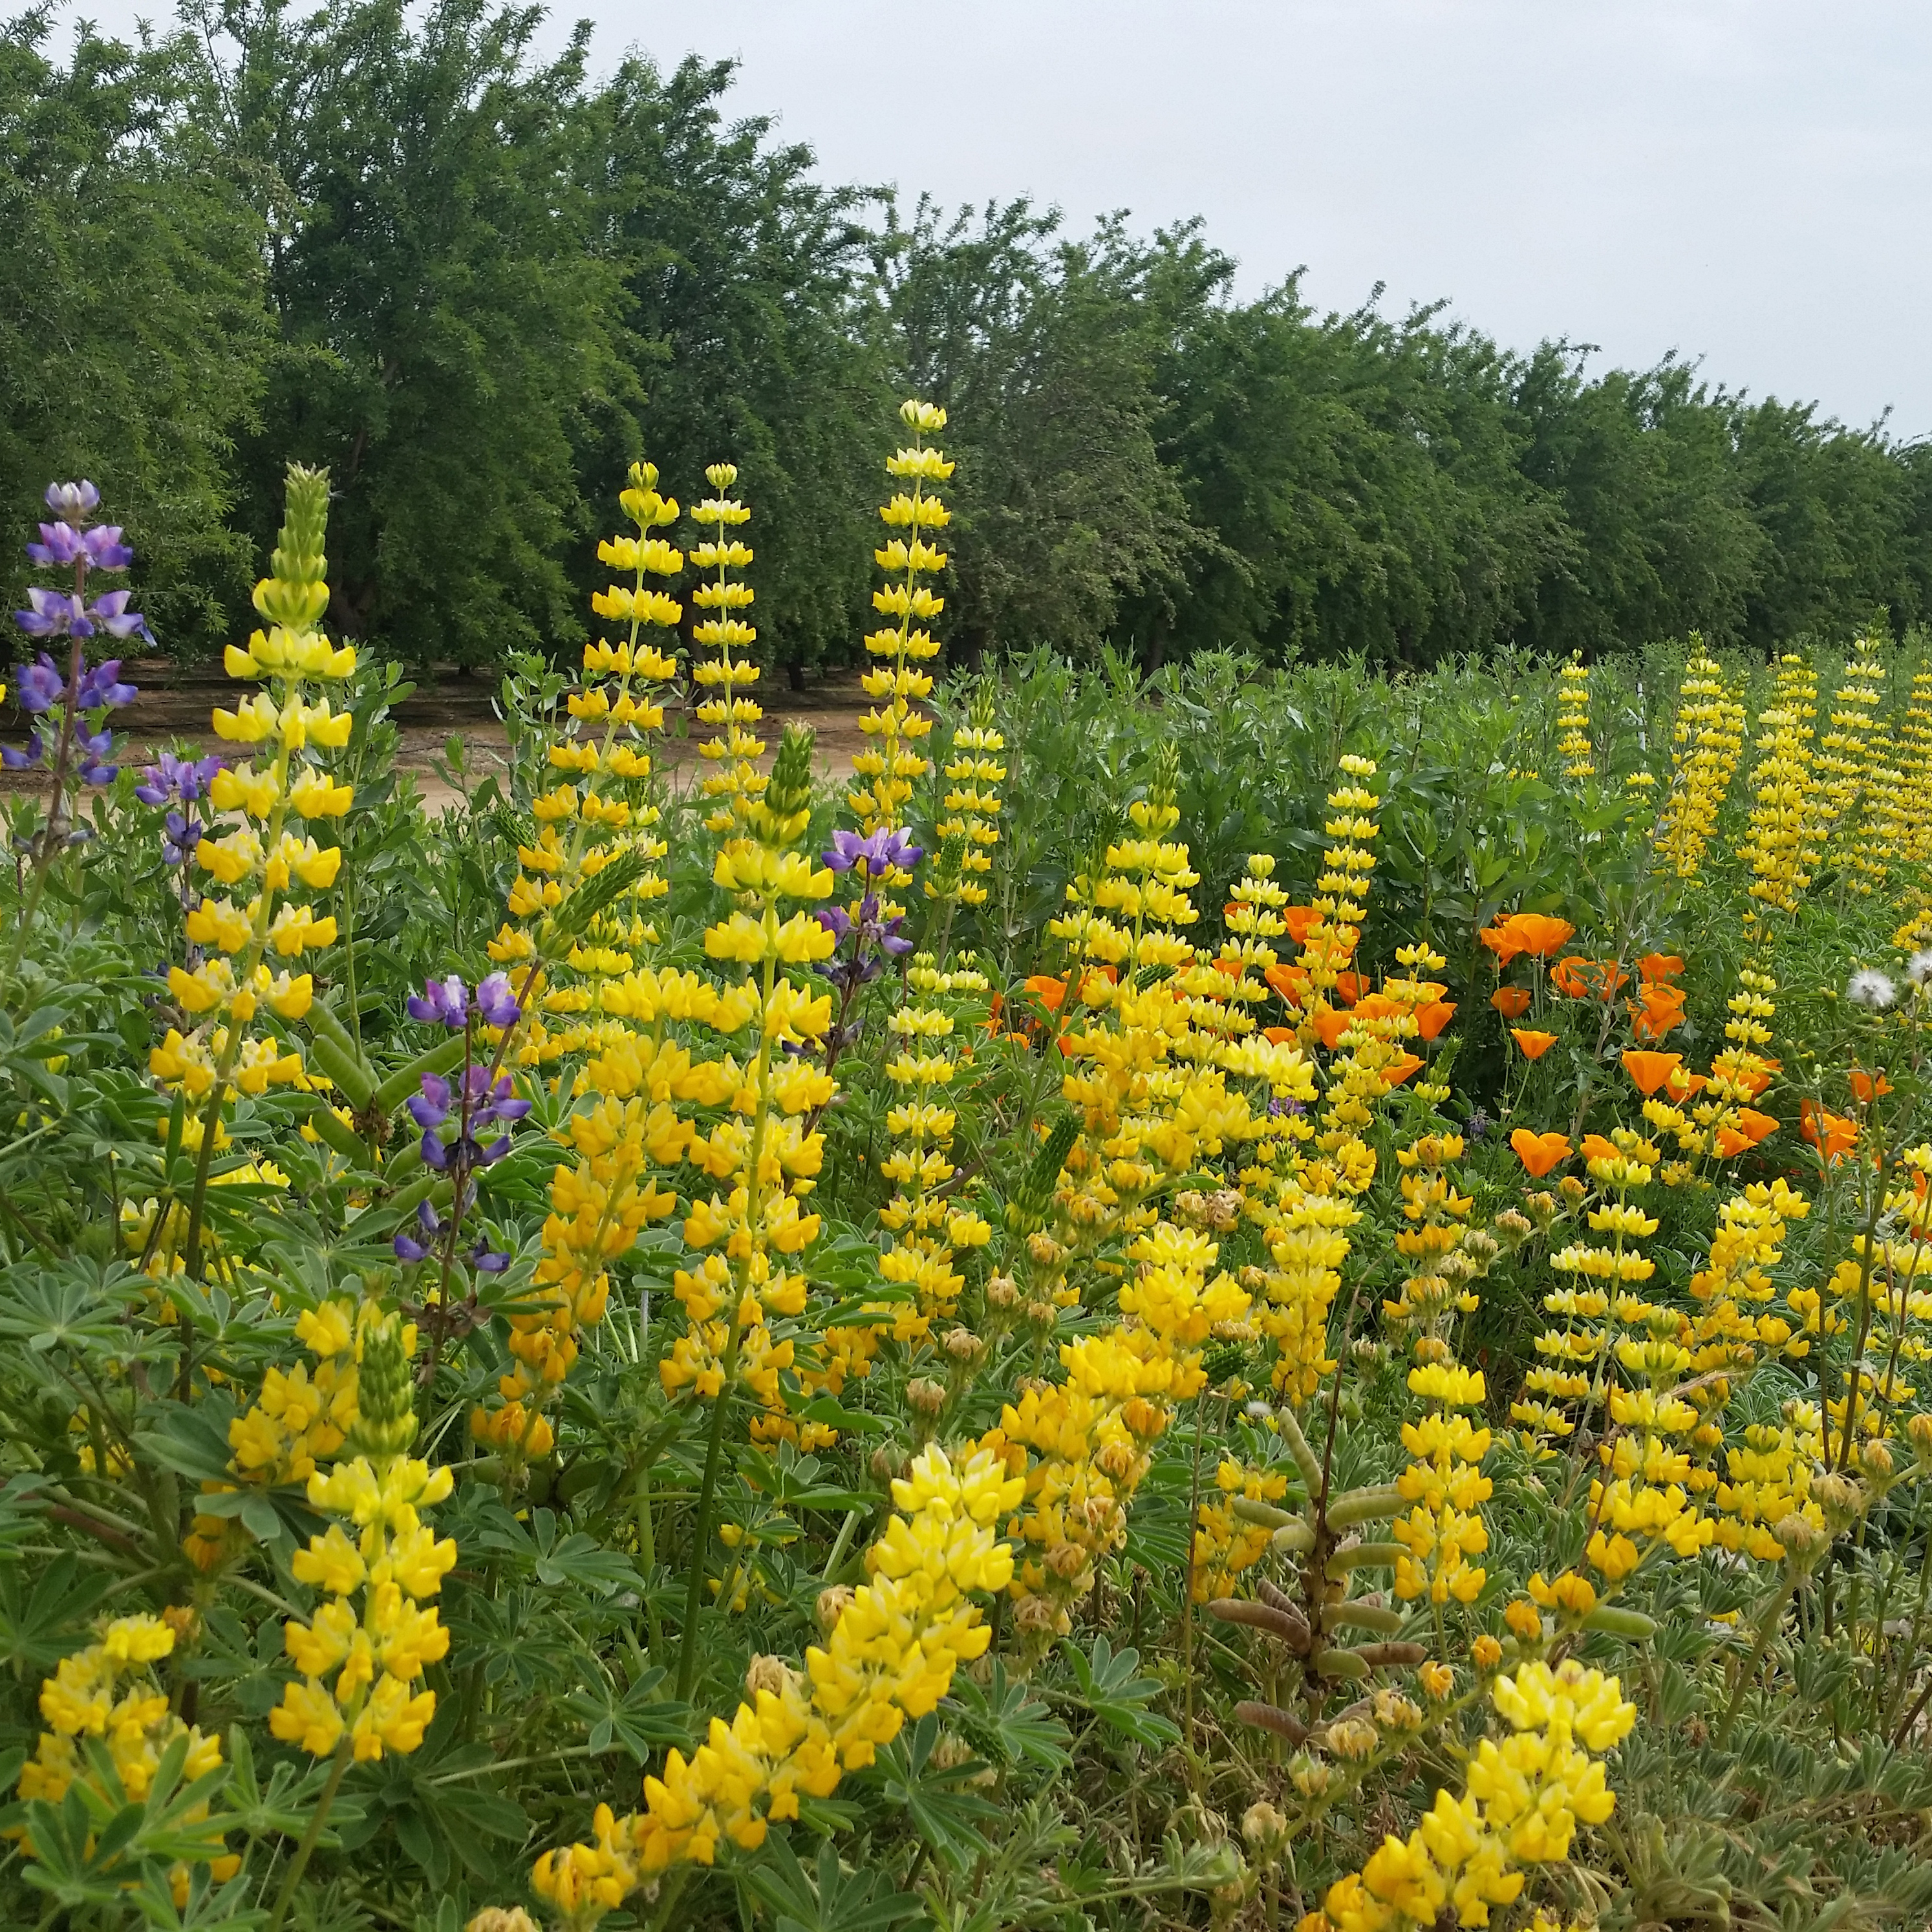 A hedgerow bordering an orchard's tidy rows is bursting with color, especially yellow.